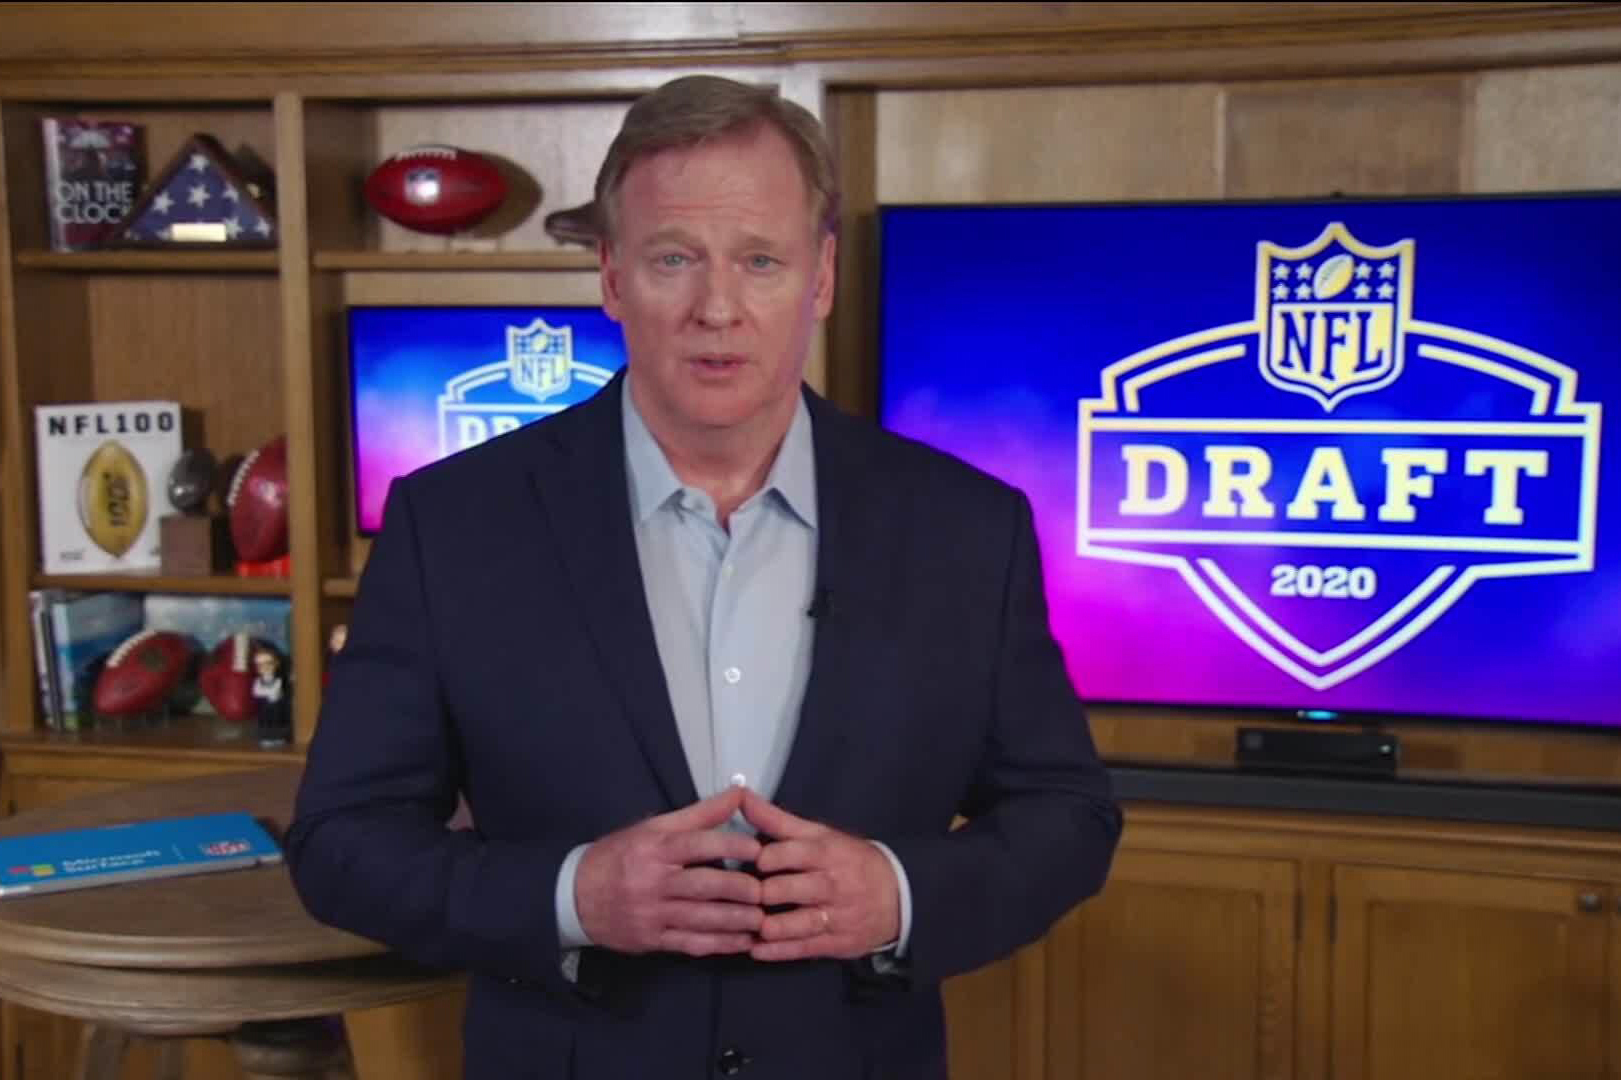 NFL Draft 2020: Day 2 live results and Seattle Seahawks updates